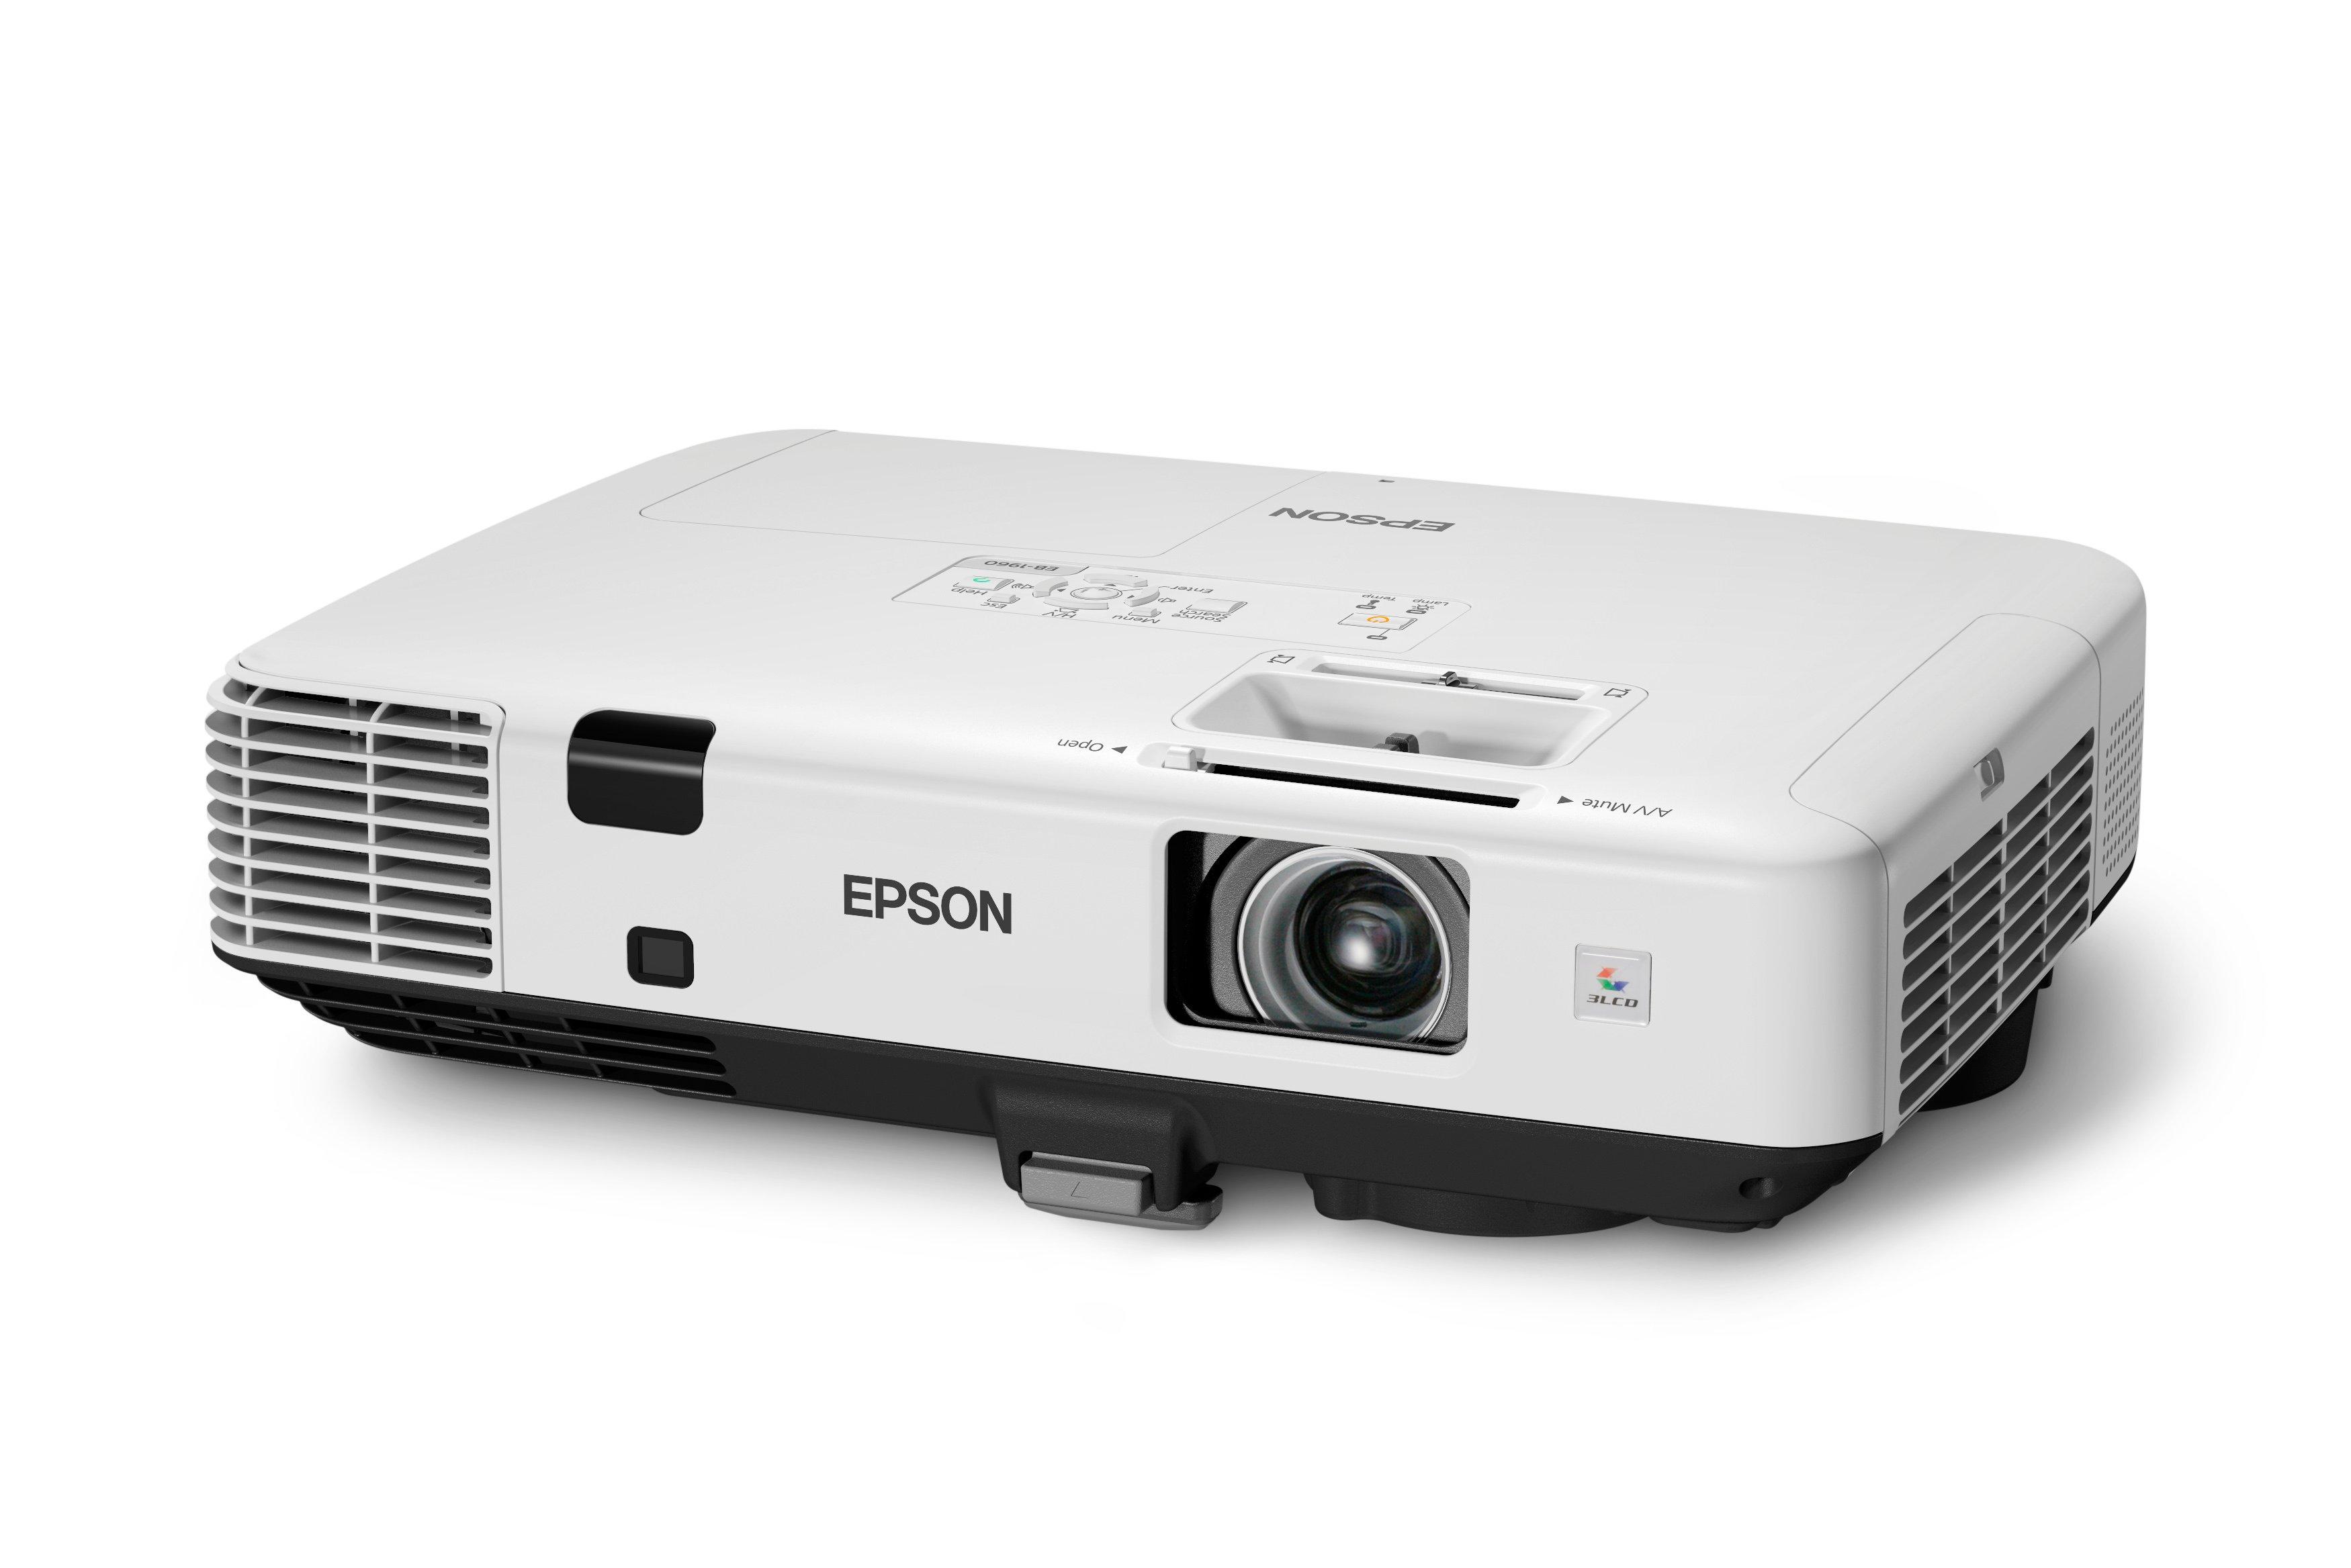 Epson EB-1960 | Installation | Projectors | Products | Epson Europe